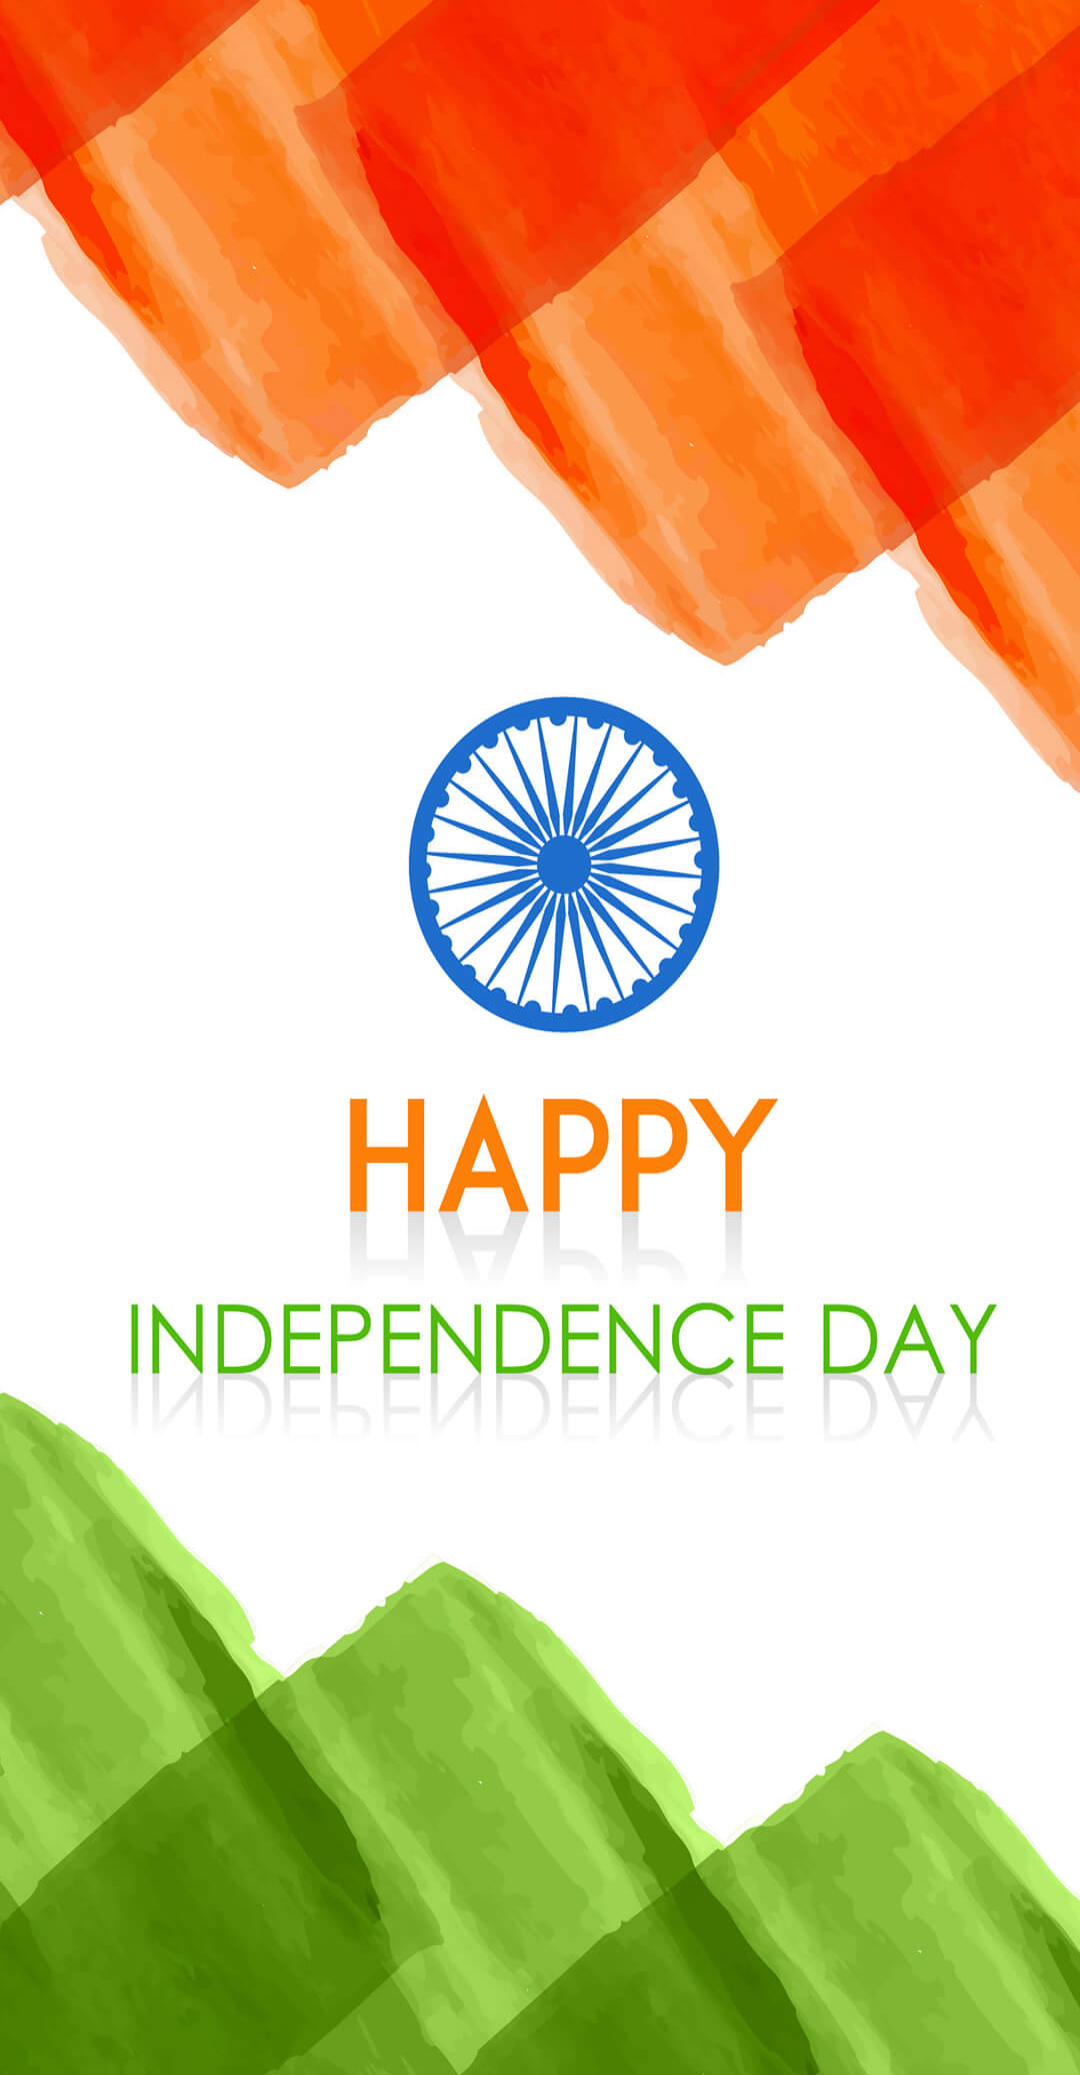 Happy Independence Day Live - HD Wallpaper 